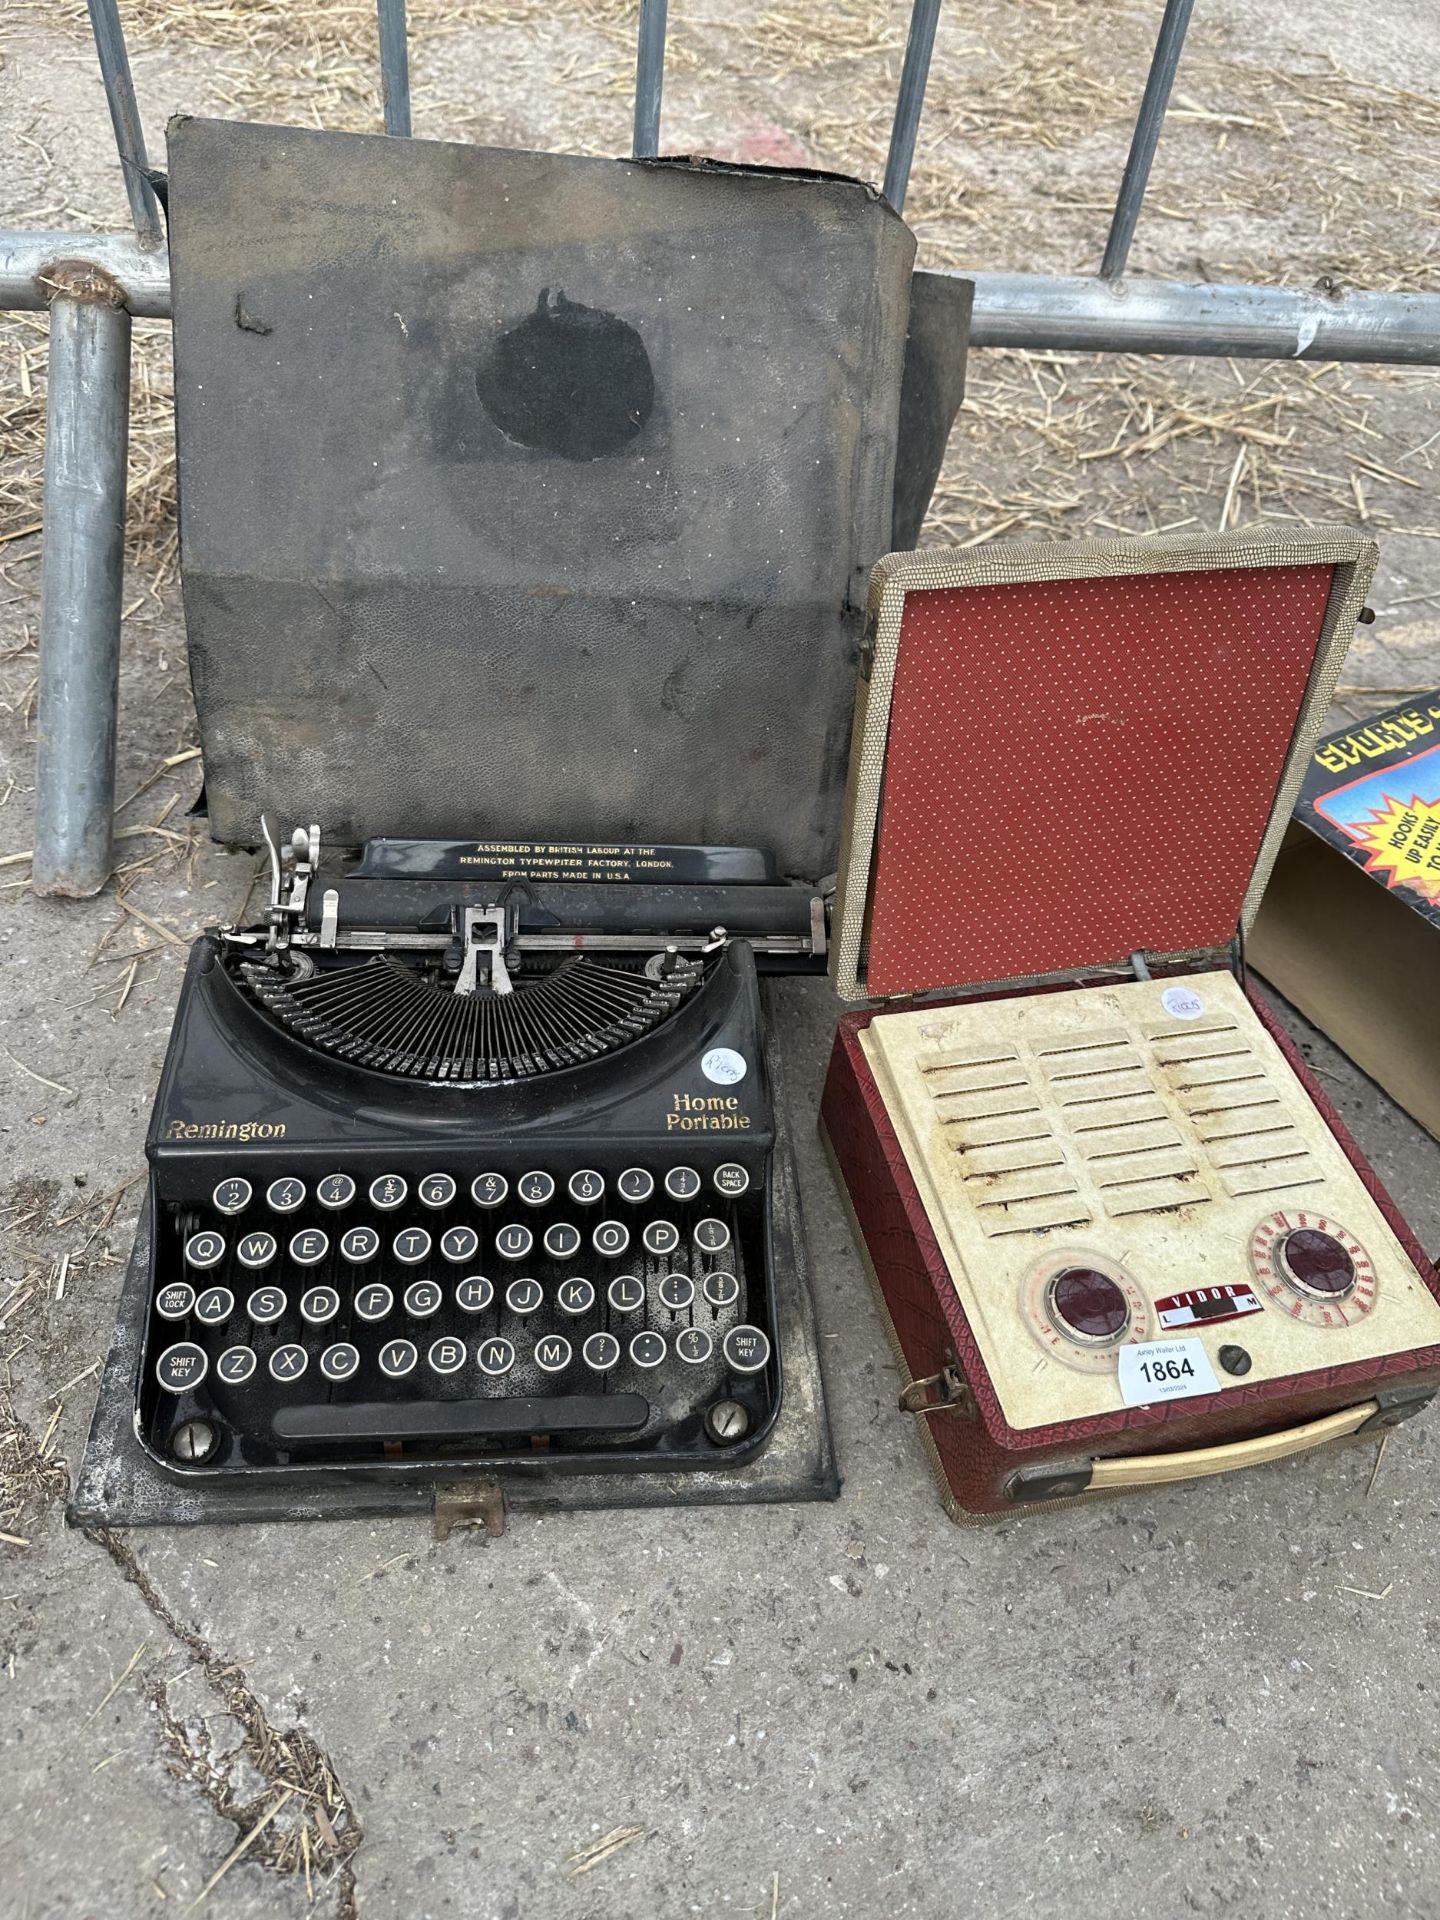 A VINTAGE REMINGTON TYPEWRITER WITH CARRY CASE AND A RETRO RADIO